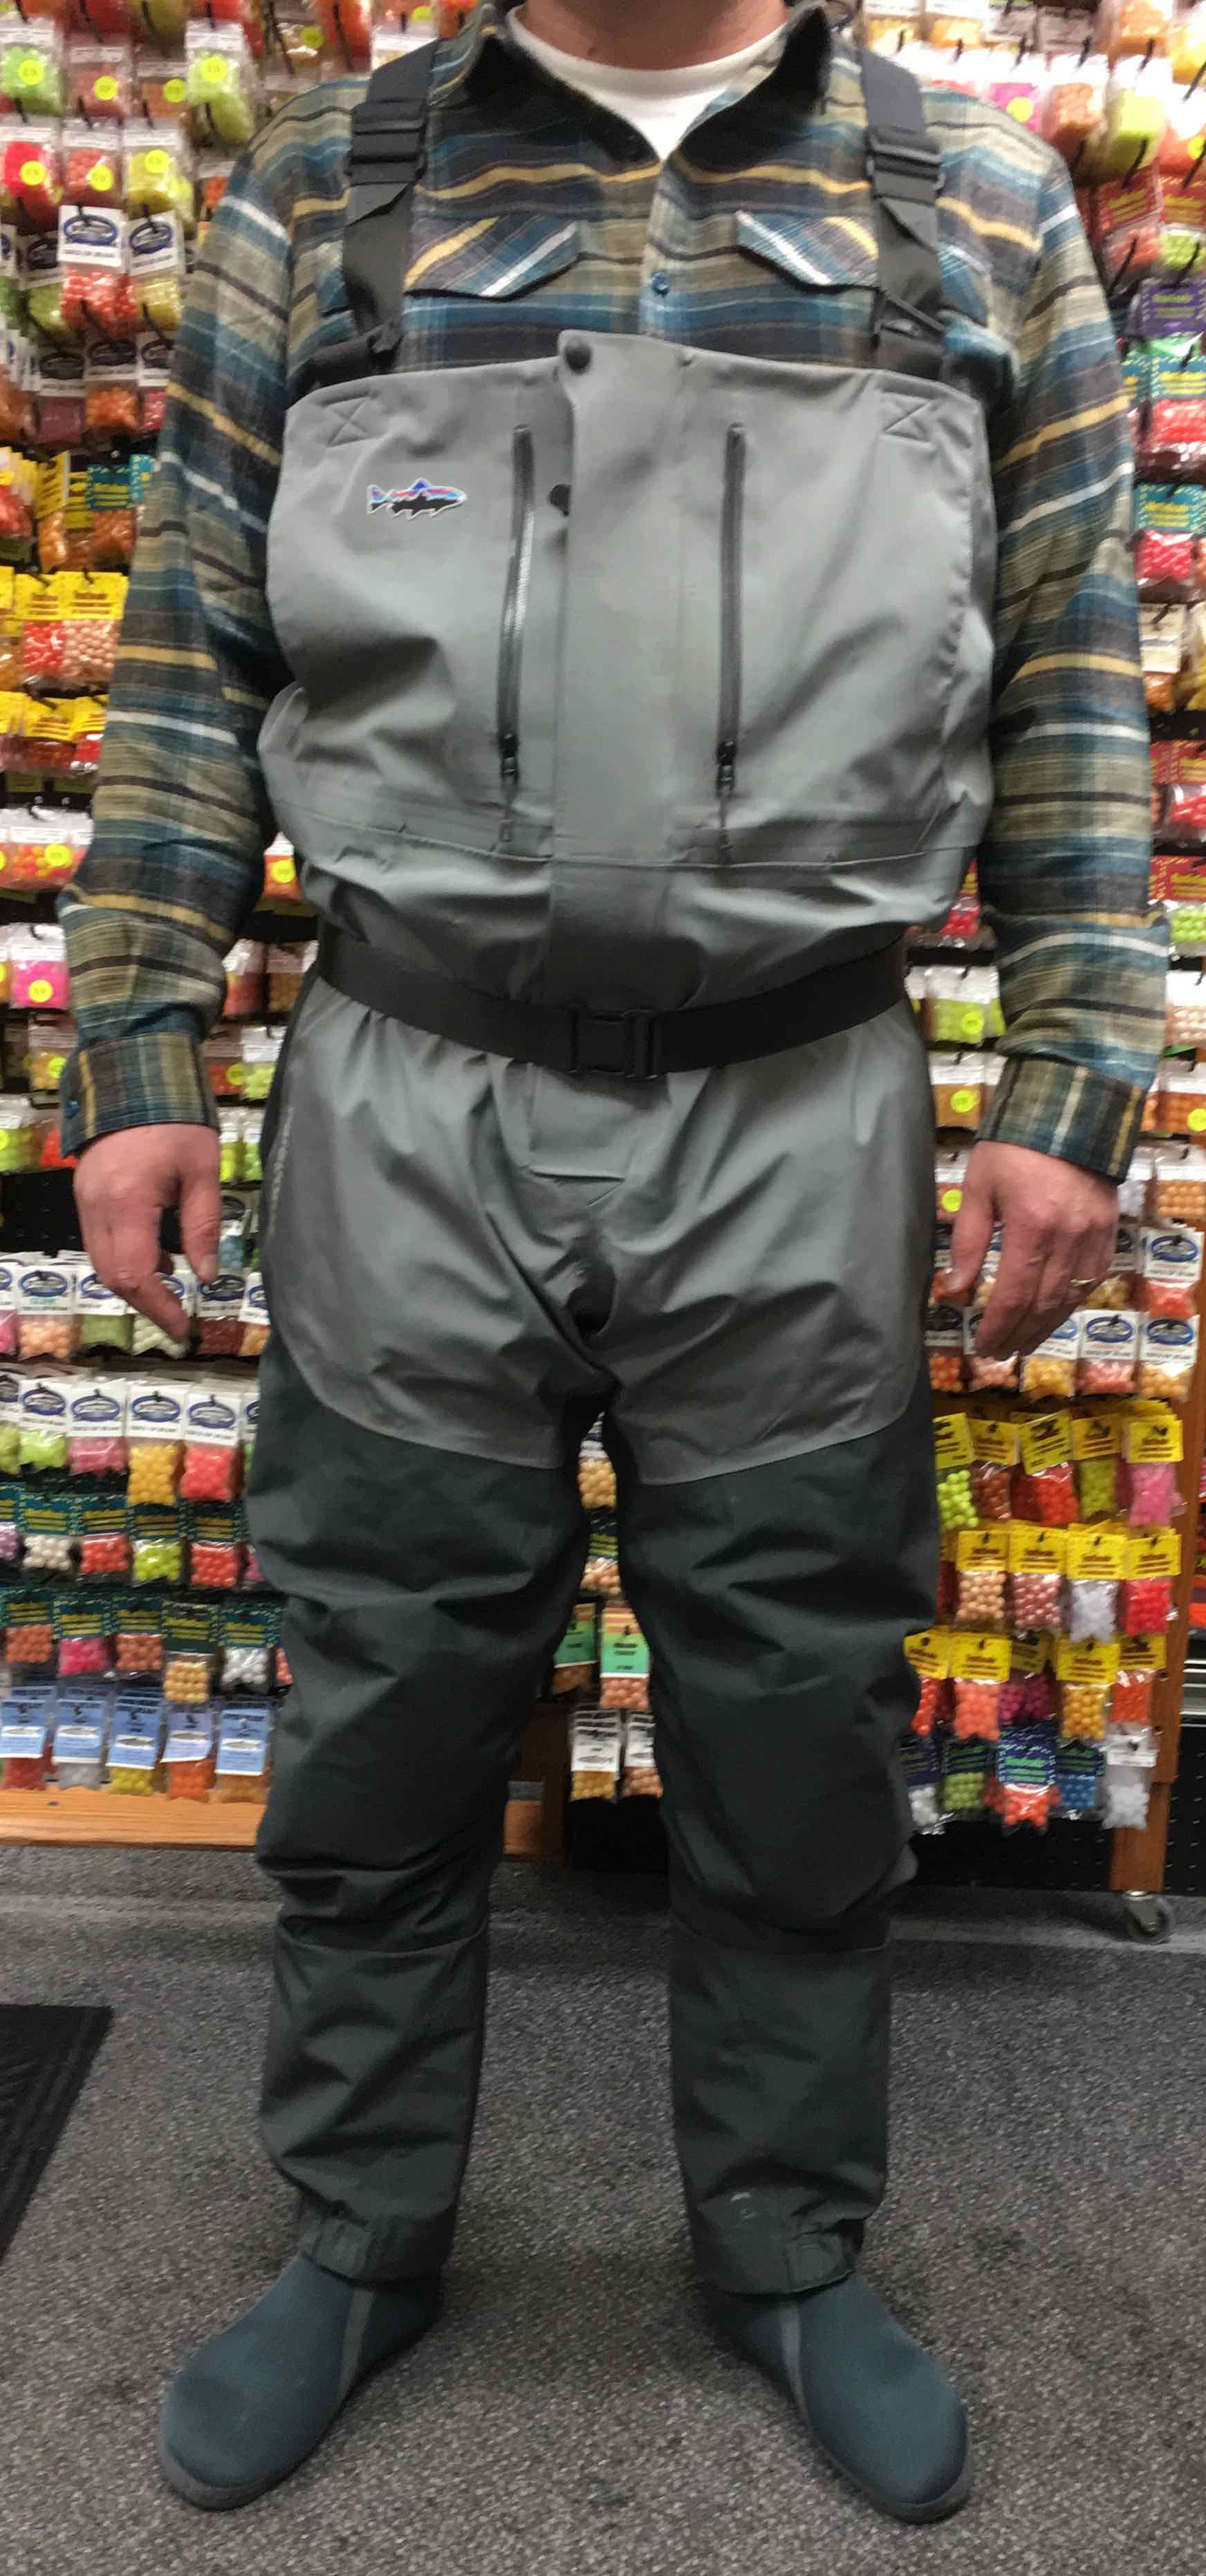 SOLD! – NEW PRICE! – Patagonia M's RIO Gallegos Zip-Front Waders